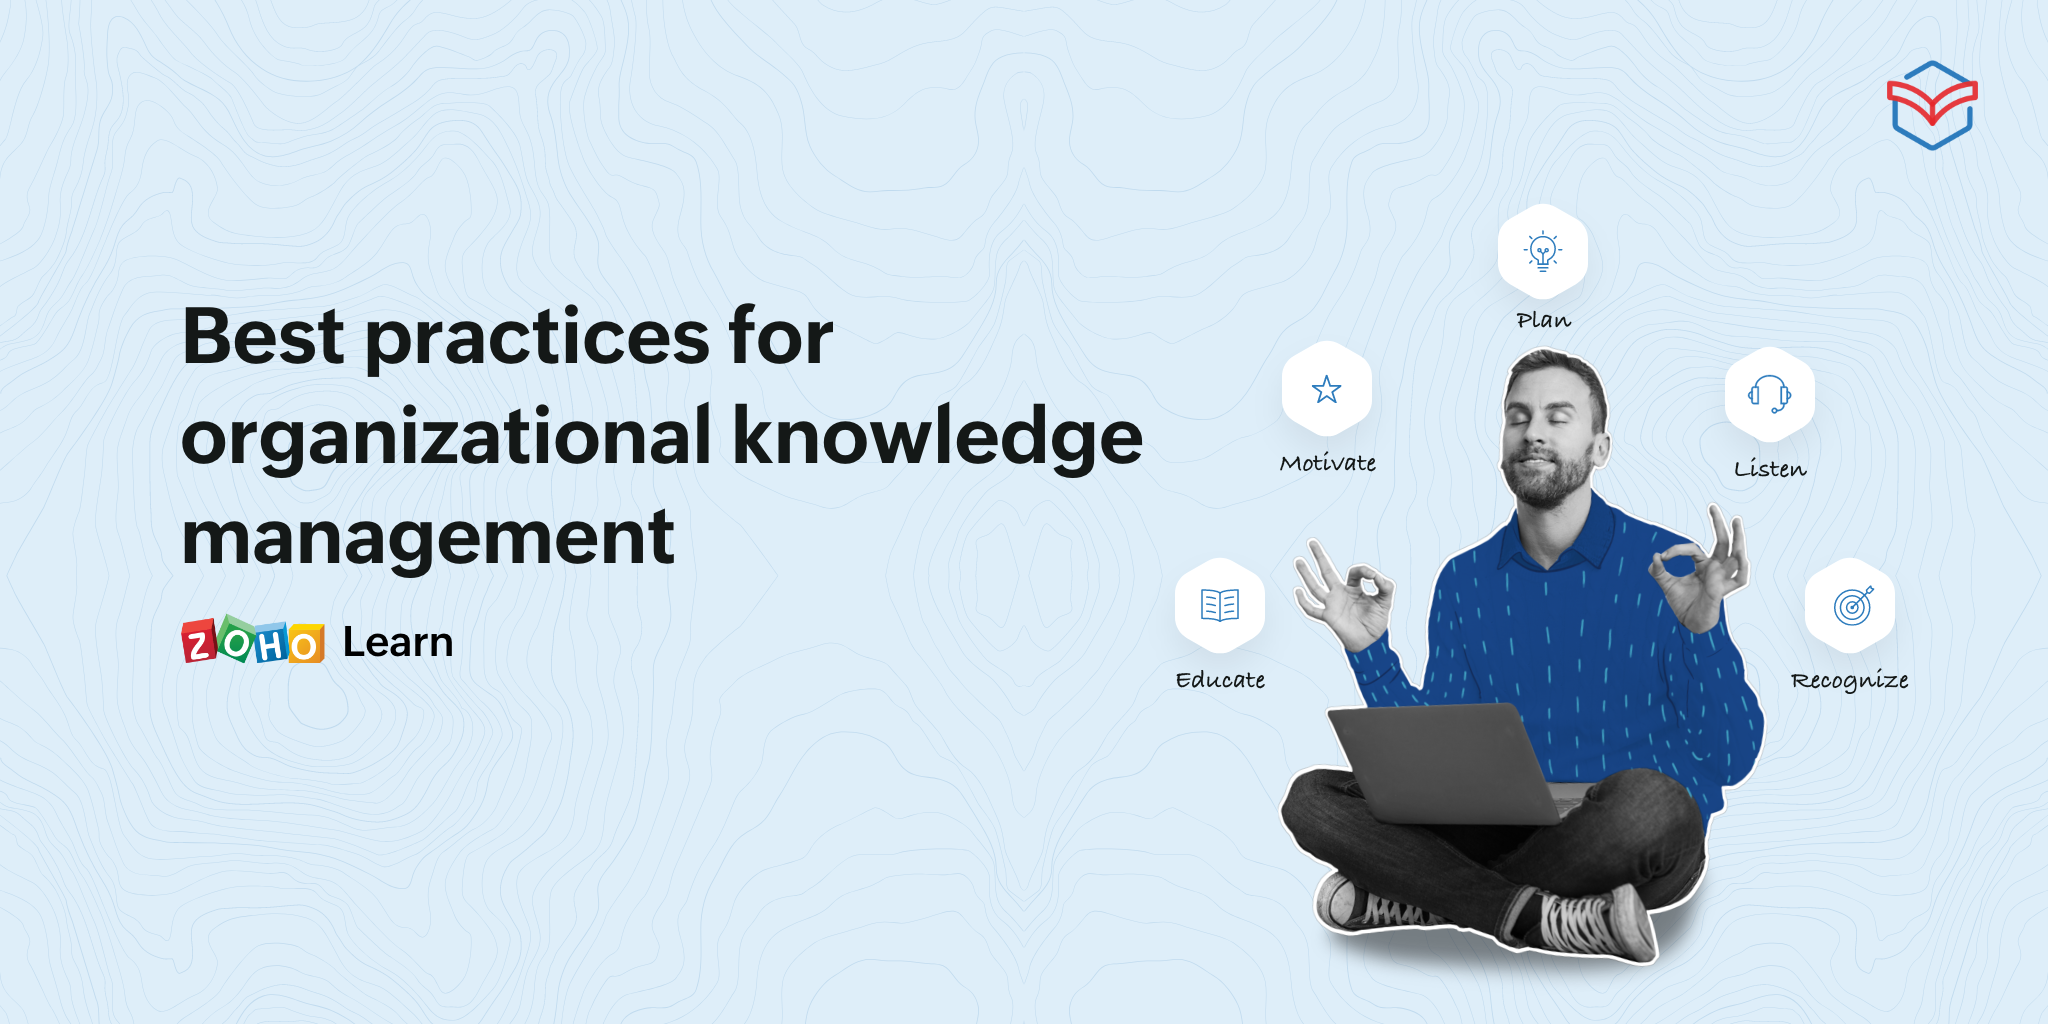 5 best practices for organizational knowledge management